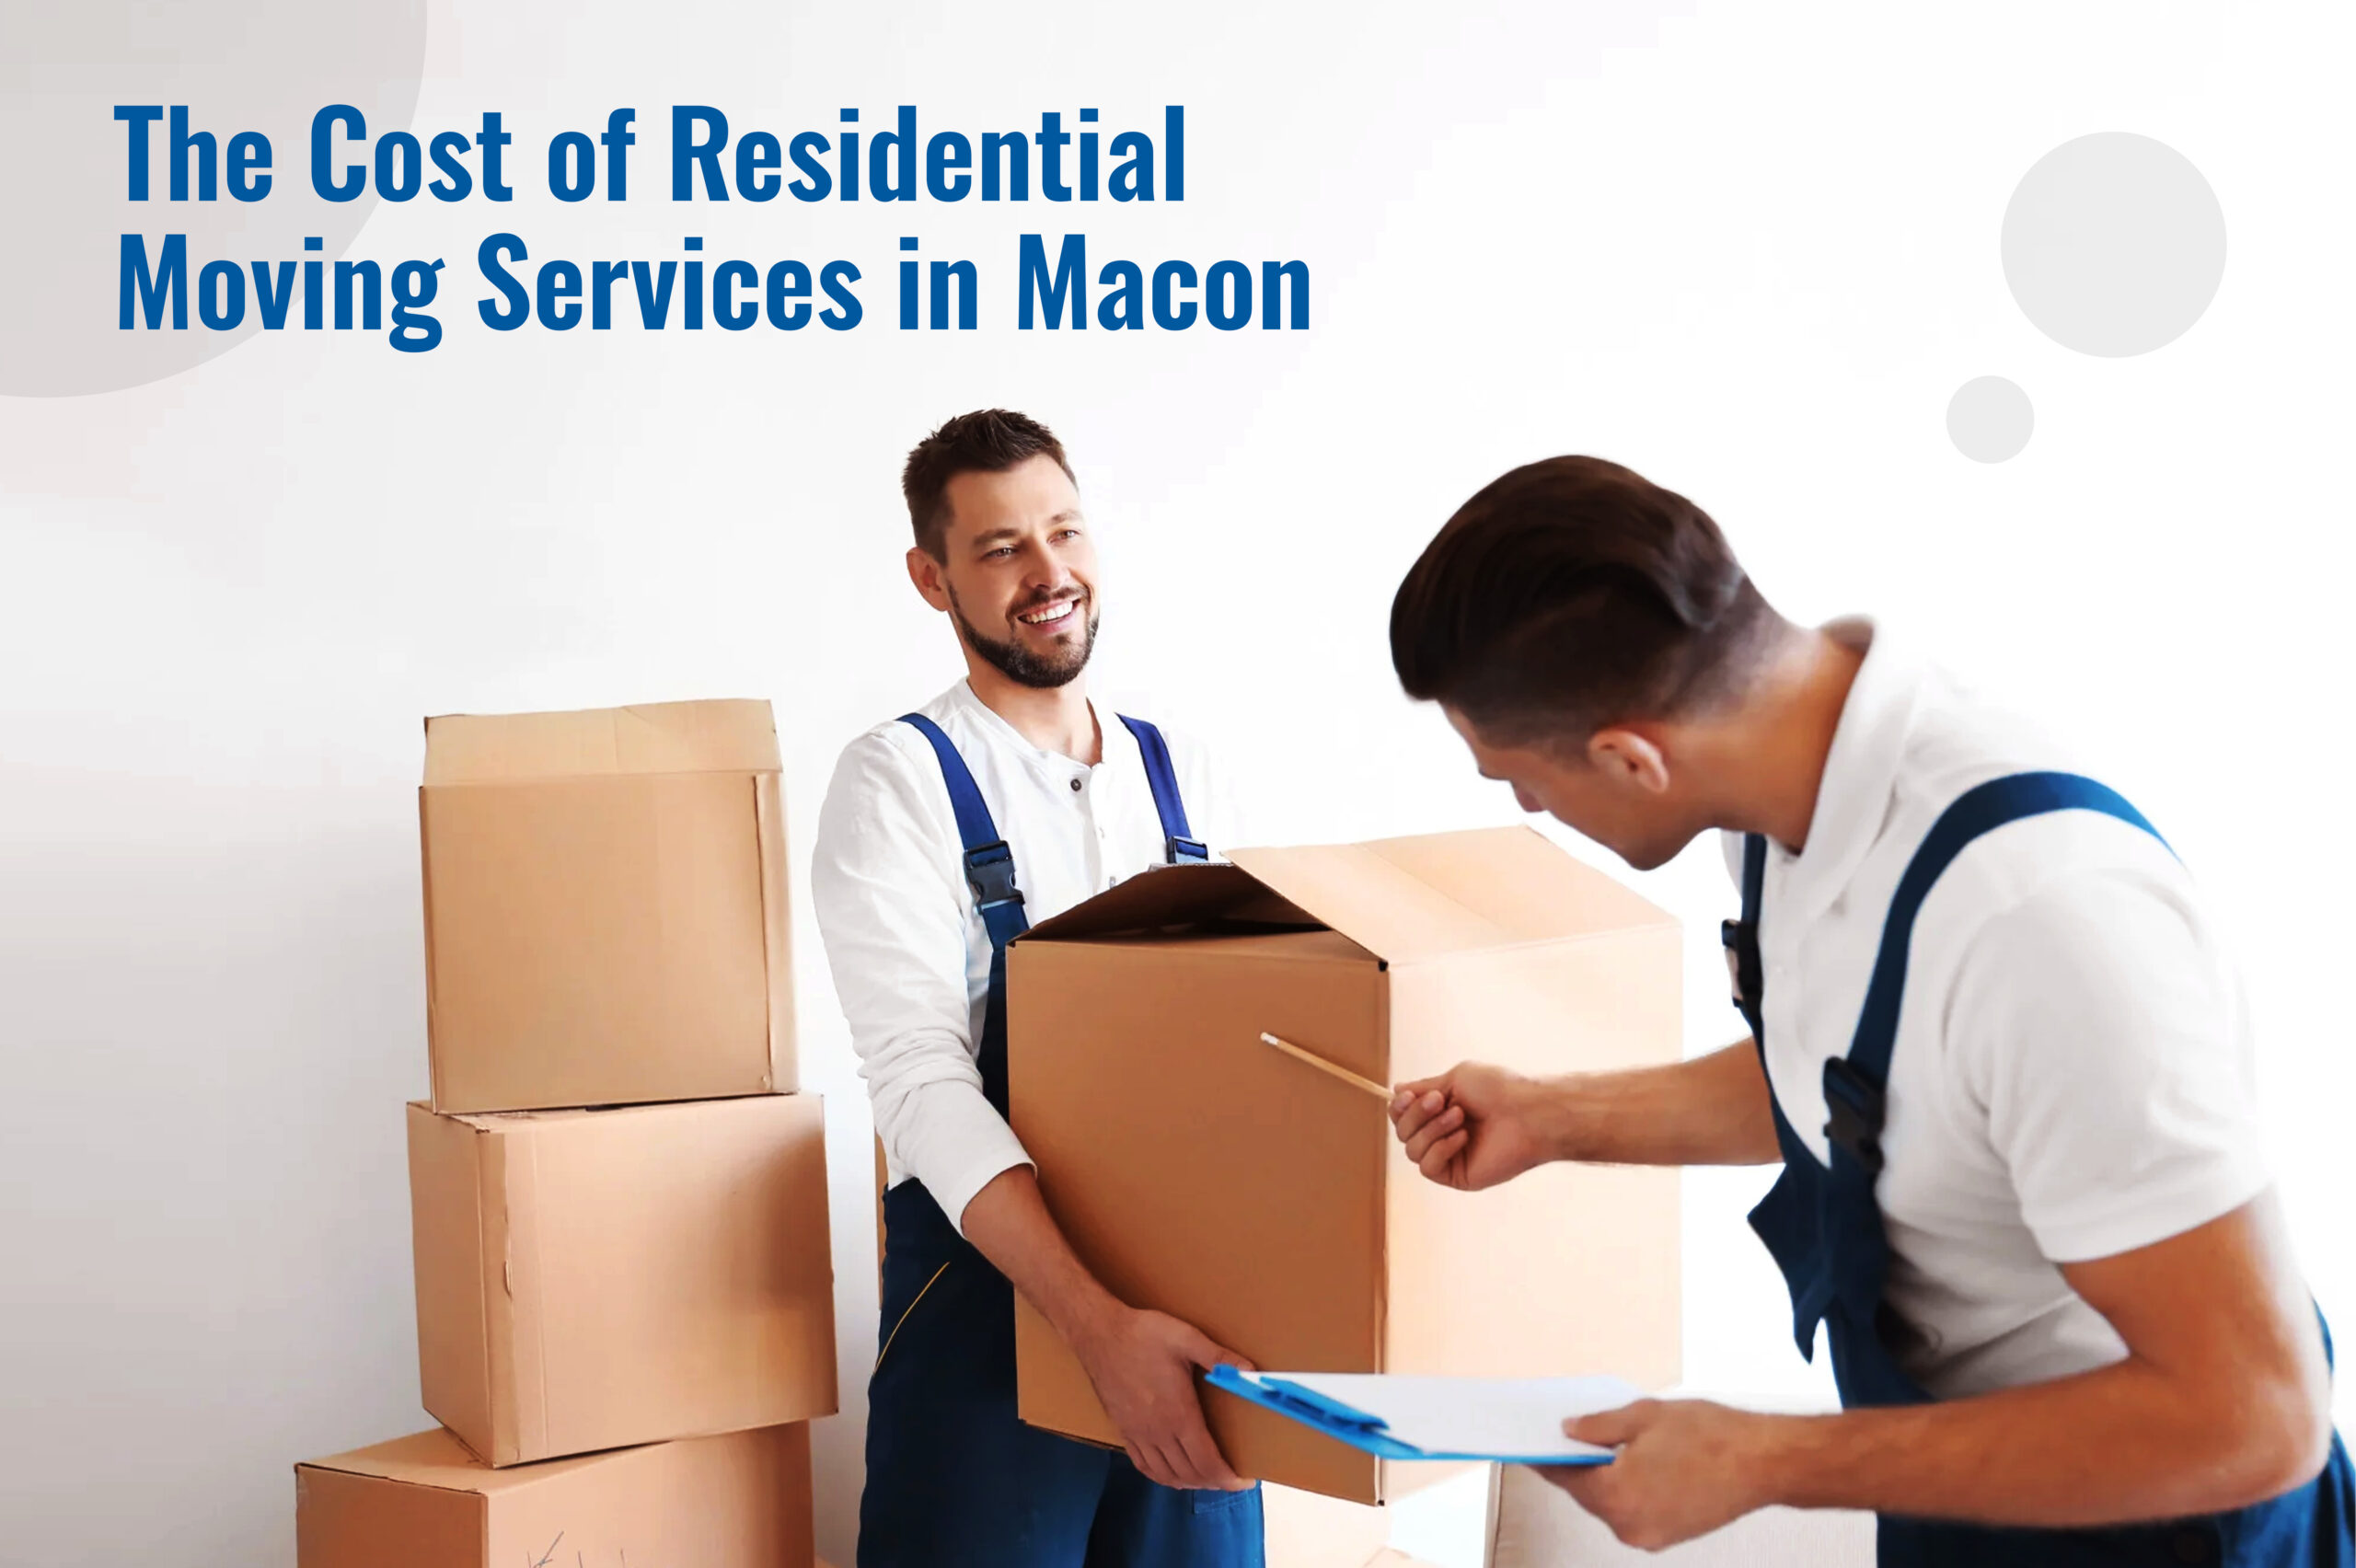 The Cost of Residential Moving Services